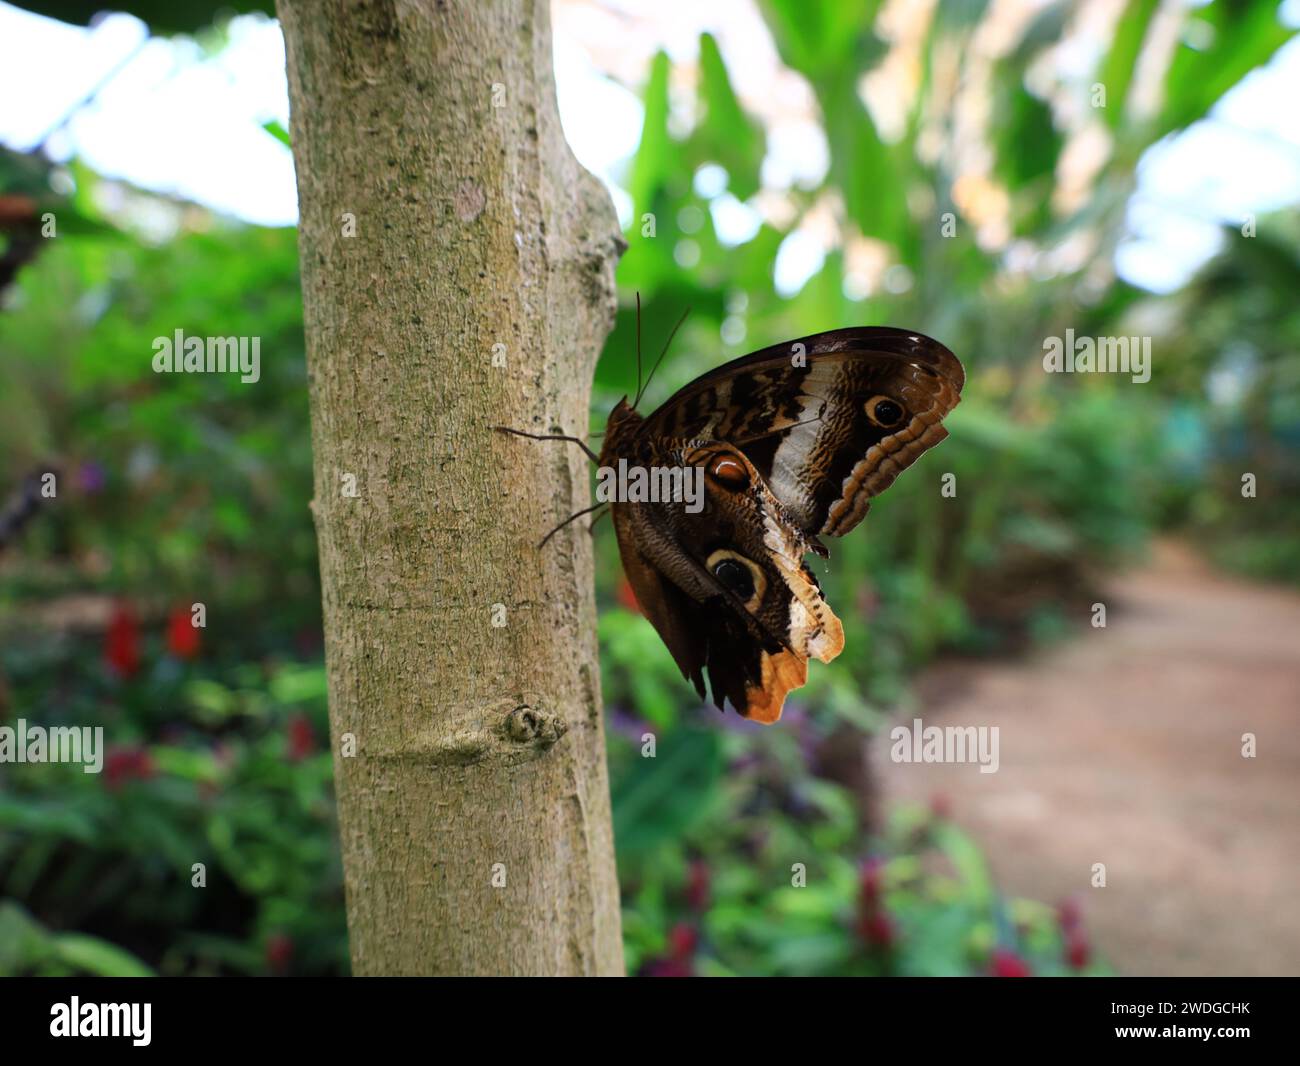 View on a butterfly in the Butterfly Greenhouse located in Queue-Lez-Yvelines Stock Photo